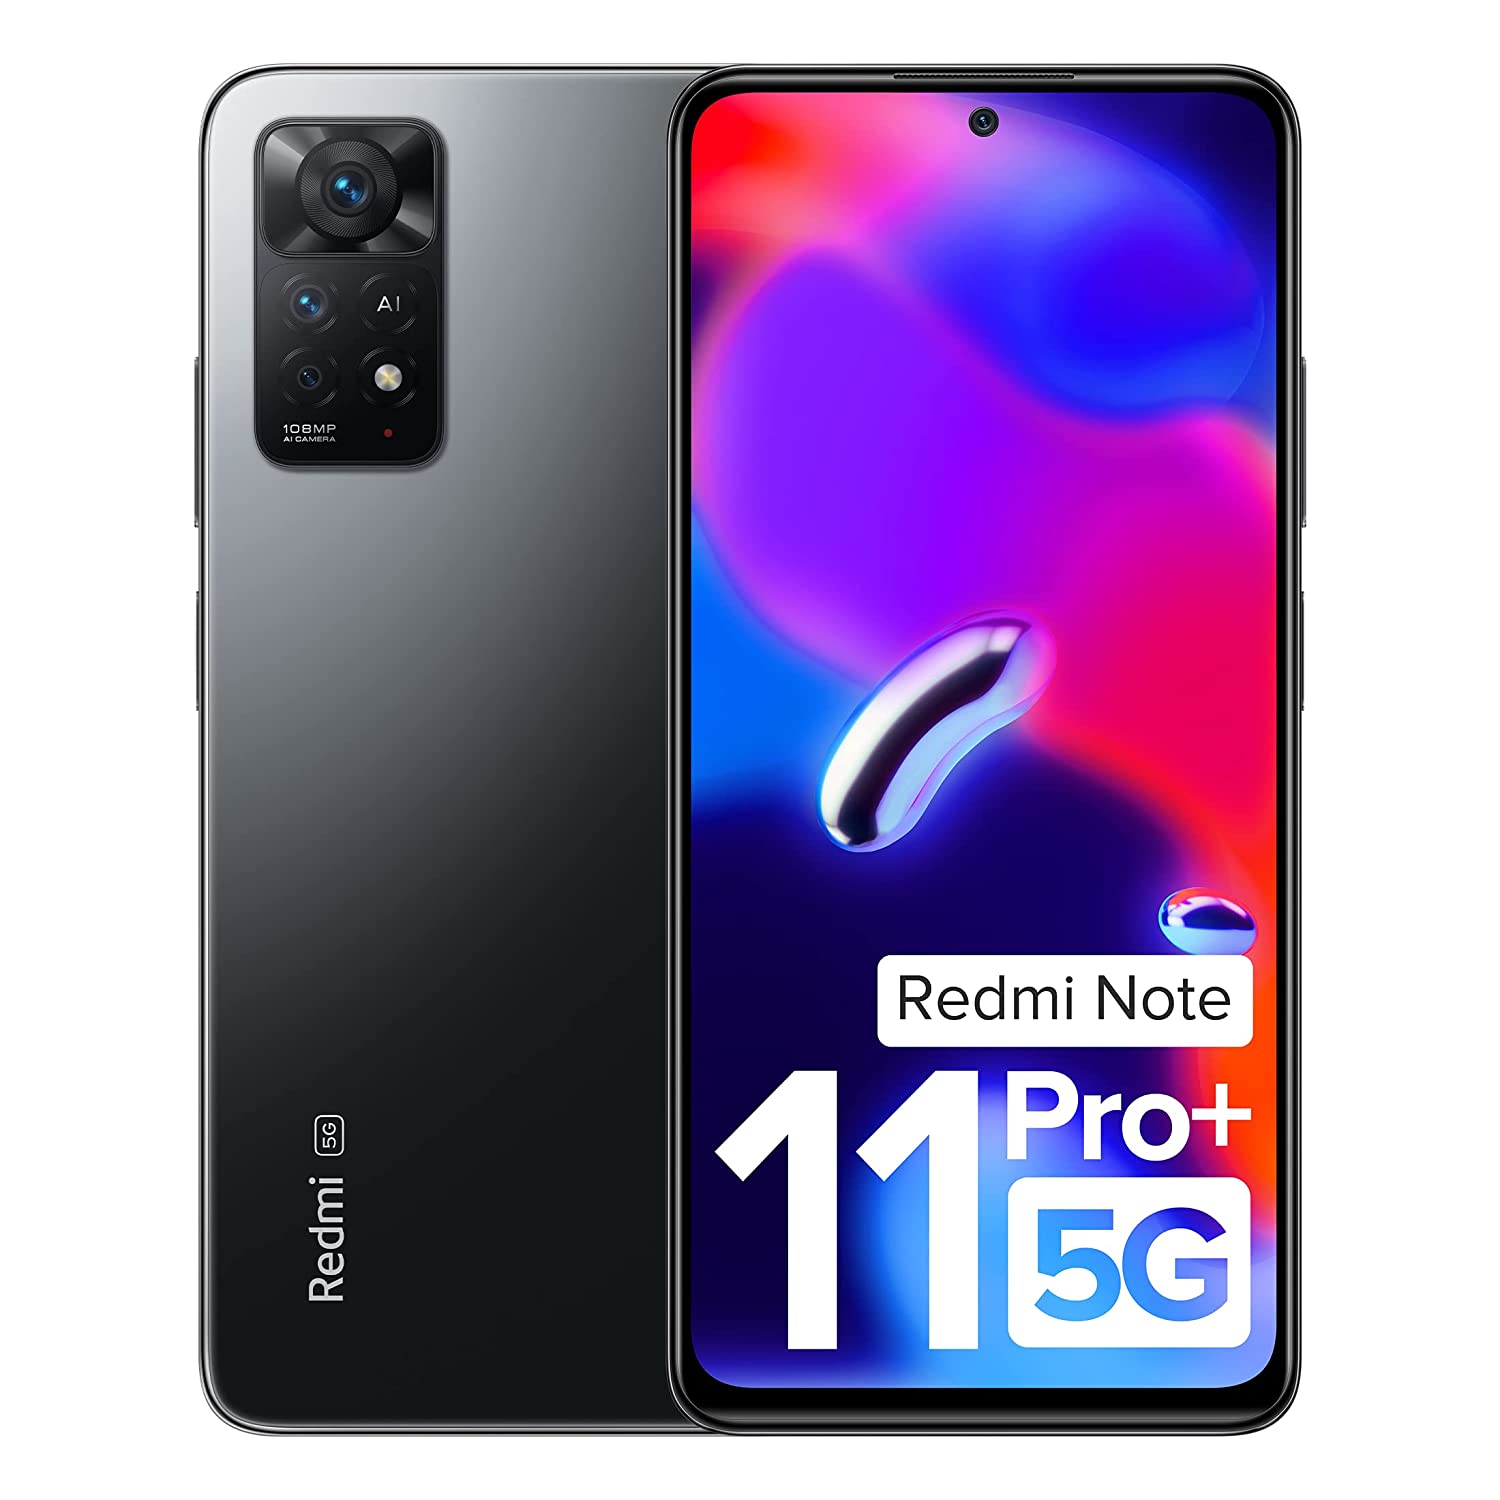 Redmi Note 11 Pro + 5G (Stealth Black, 8GB RAM, 256GB Storage) | 67W Turbo Charge | 120Hz Super AMOLED Display | Additional Exchange Offers Available | Charger Included